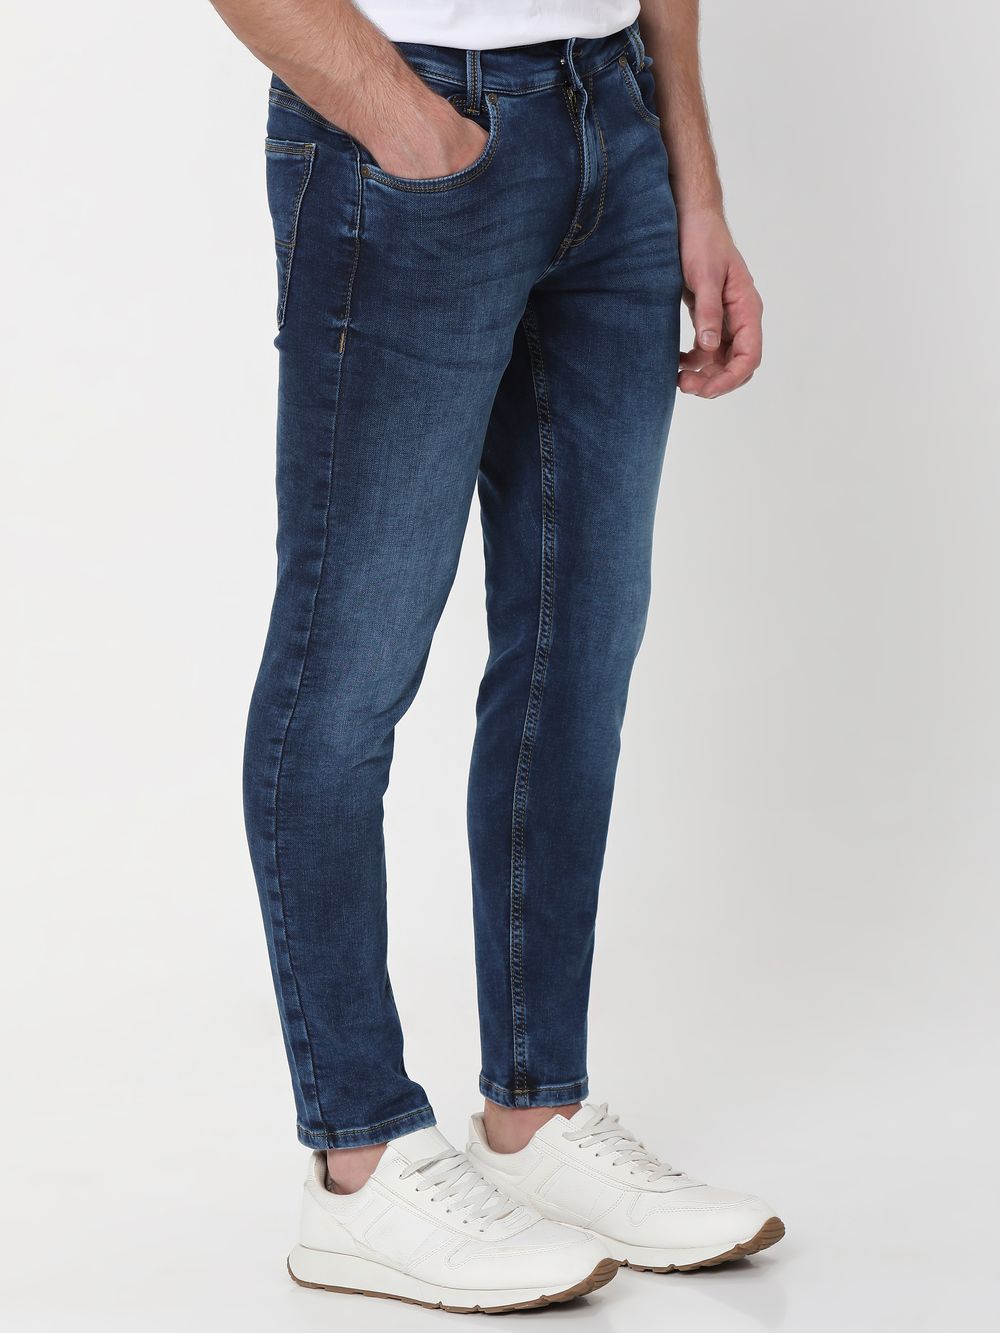 Tinted Ankle Length Fly Weight Jeans